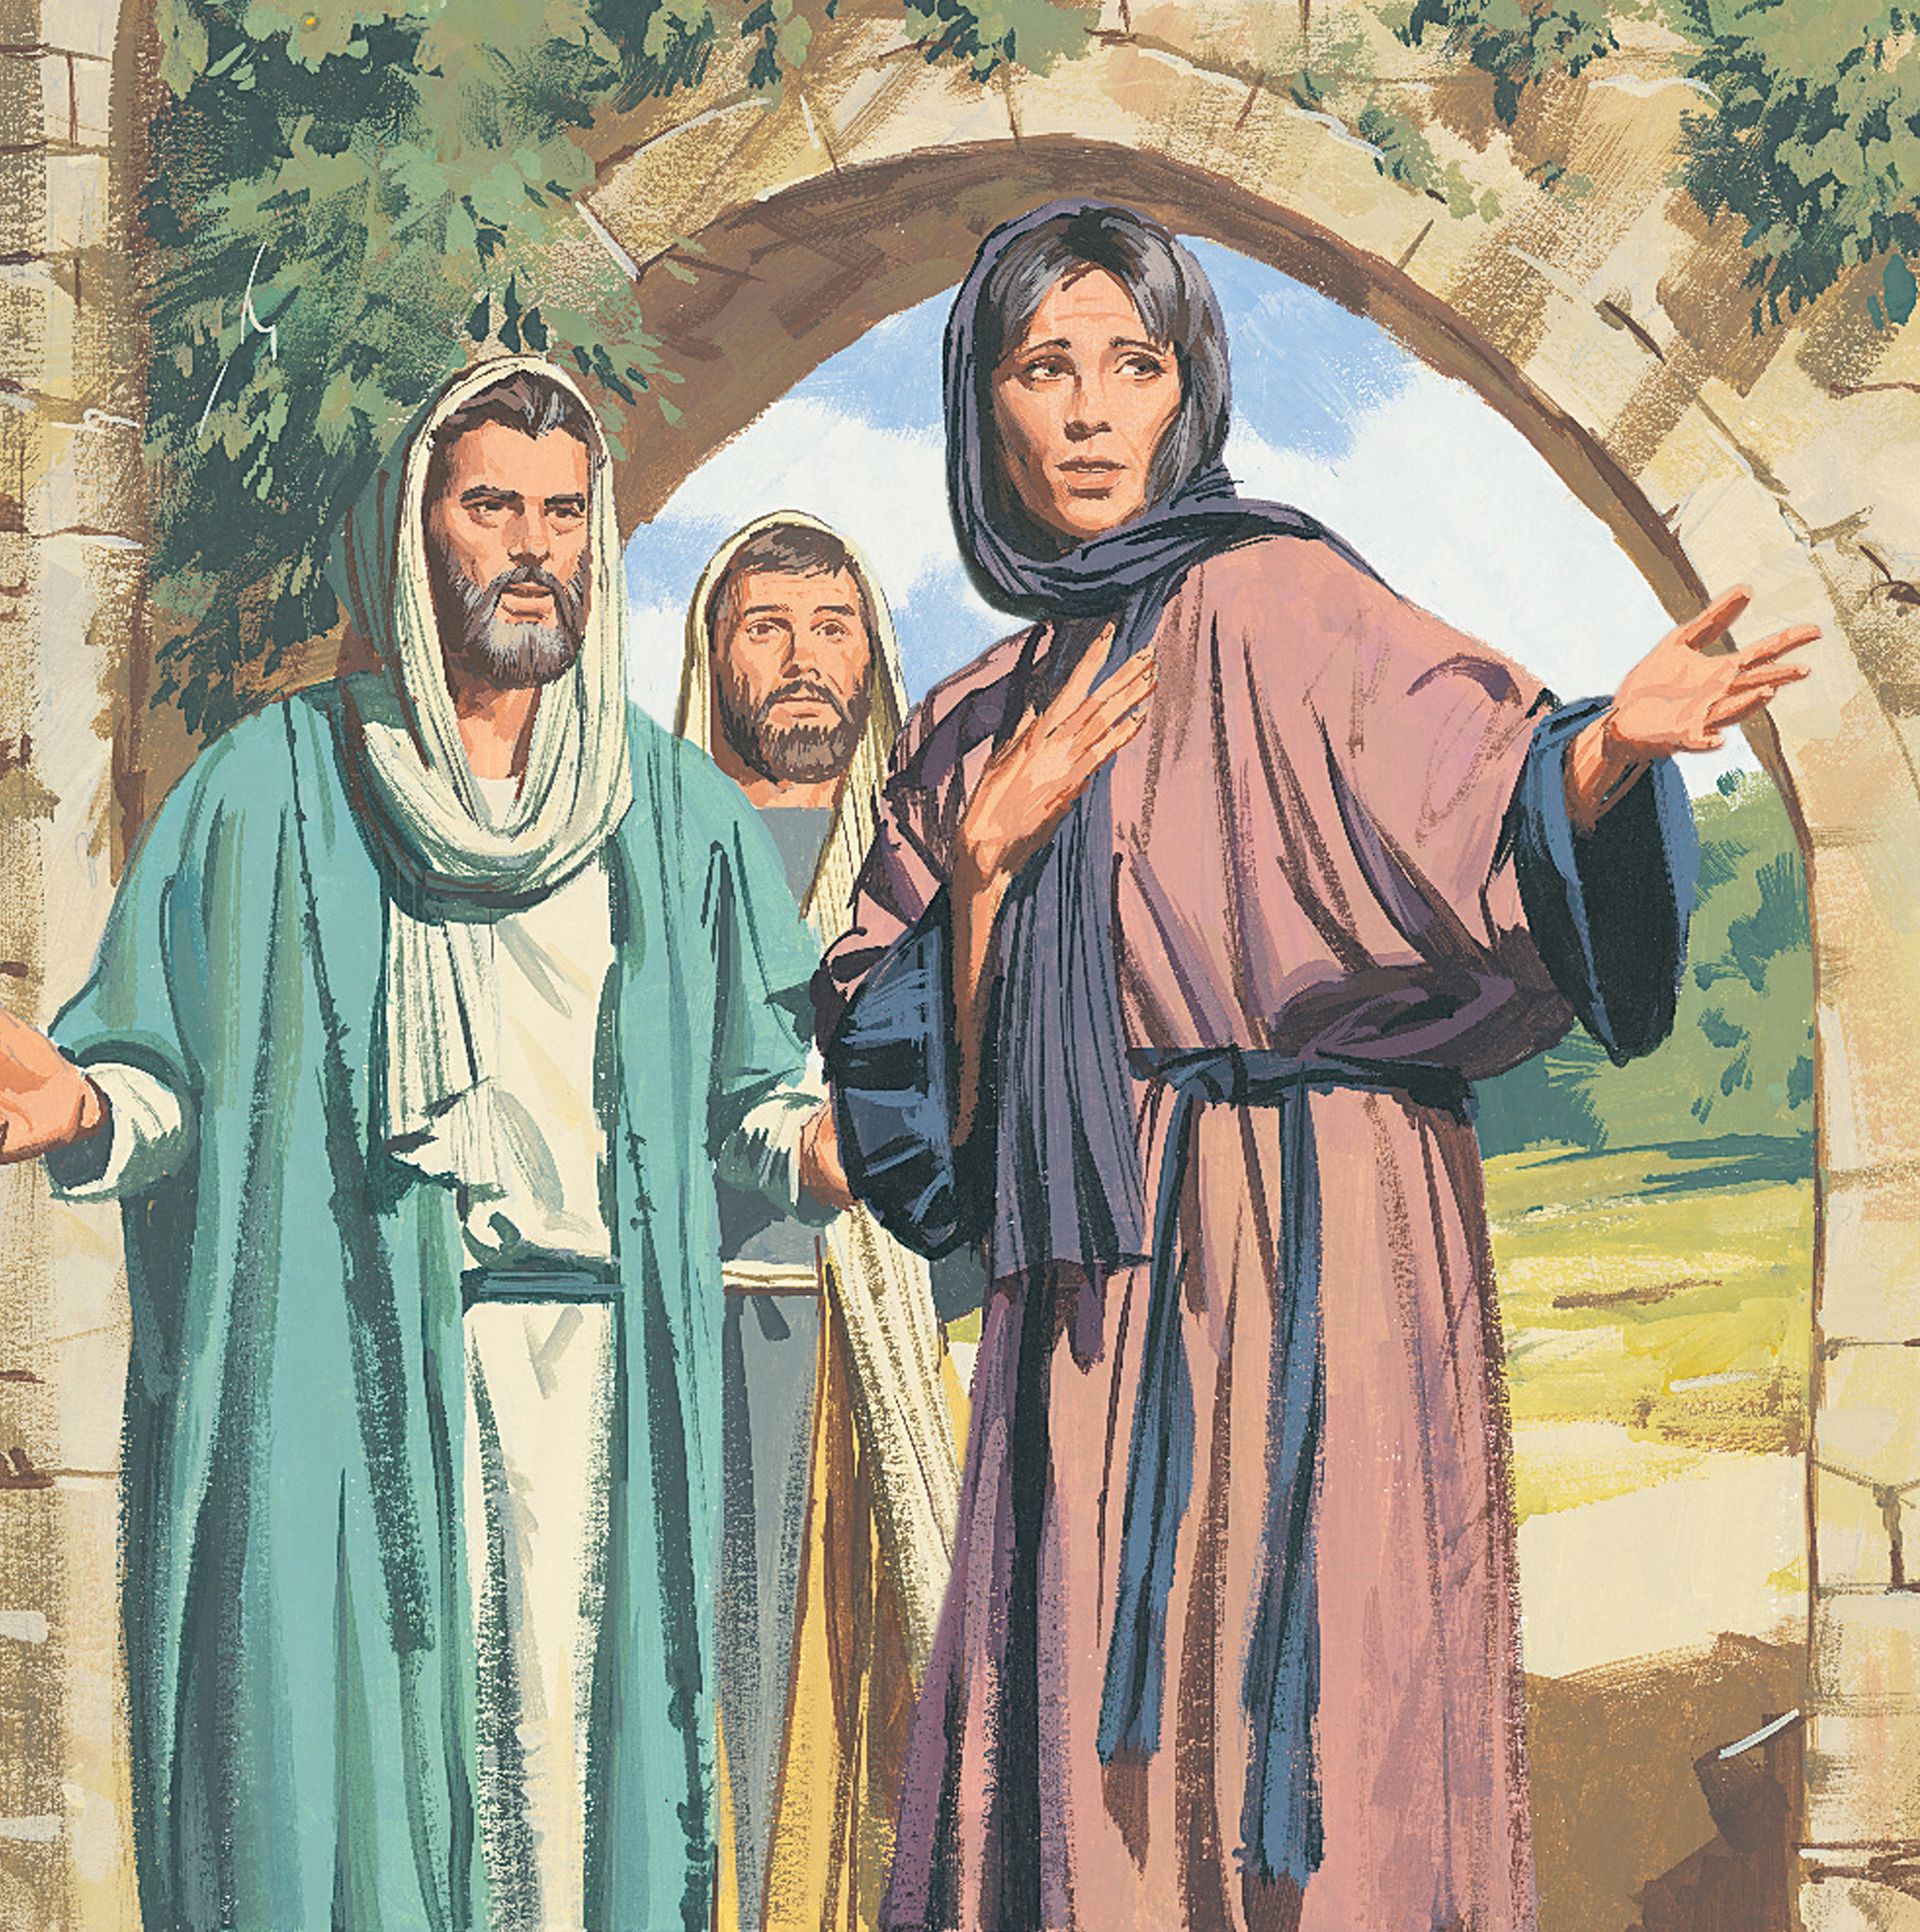 An illustration by Paul Mann of Mary Magdalene telling Peter and John that Christ’s body is gone.